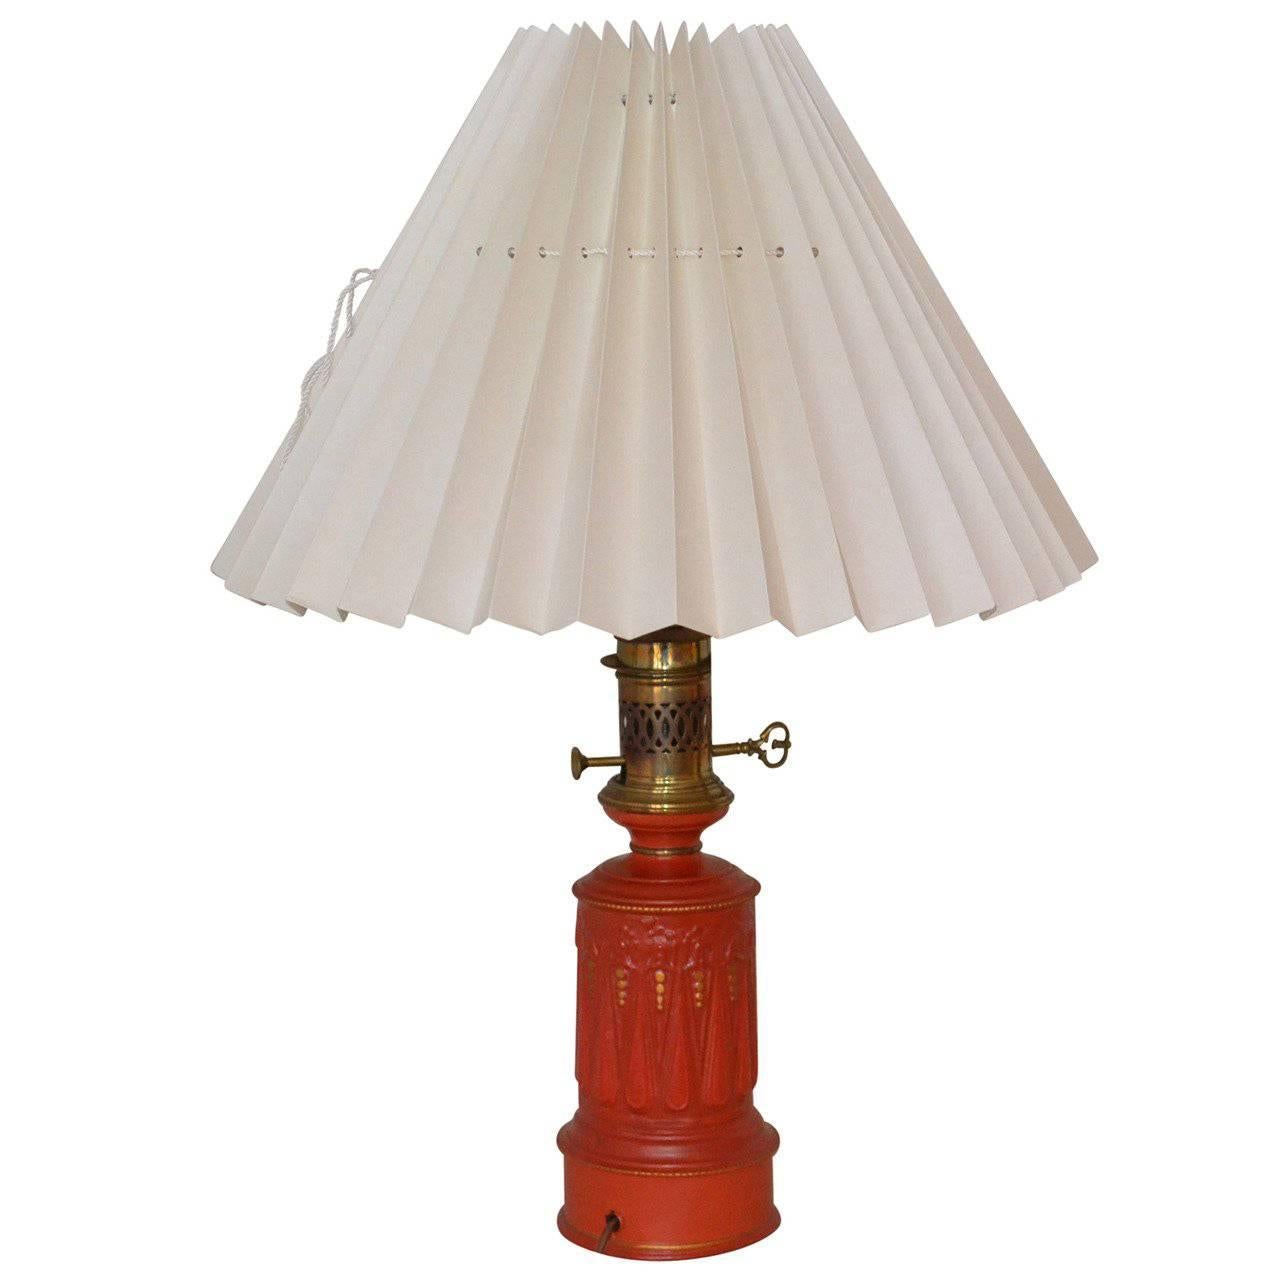 Edwardian Cast Iron Column Table Lamp, Table Lamps Wrought Iron Baseboard